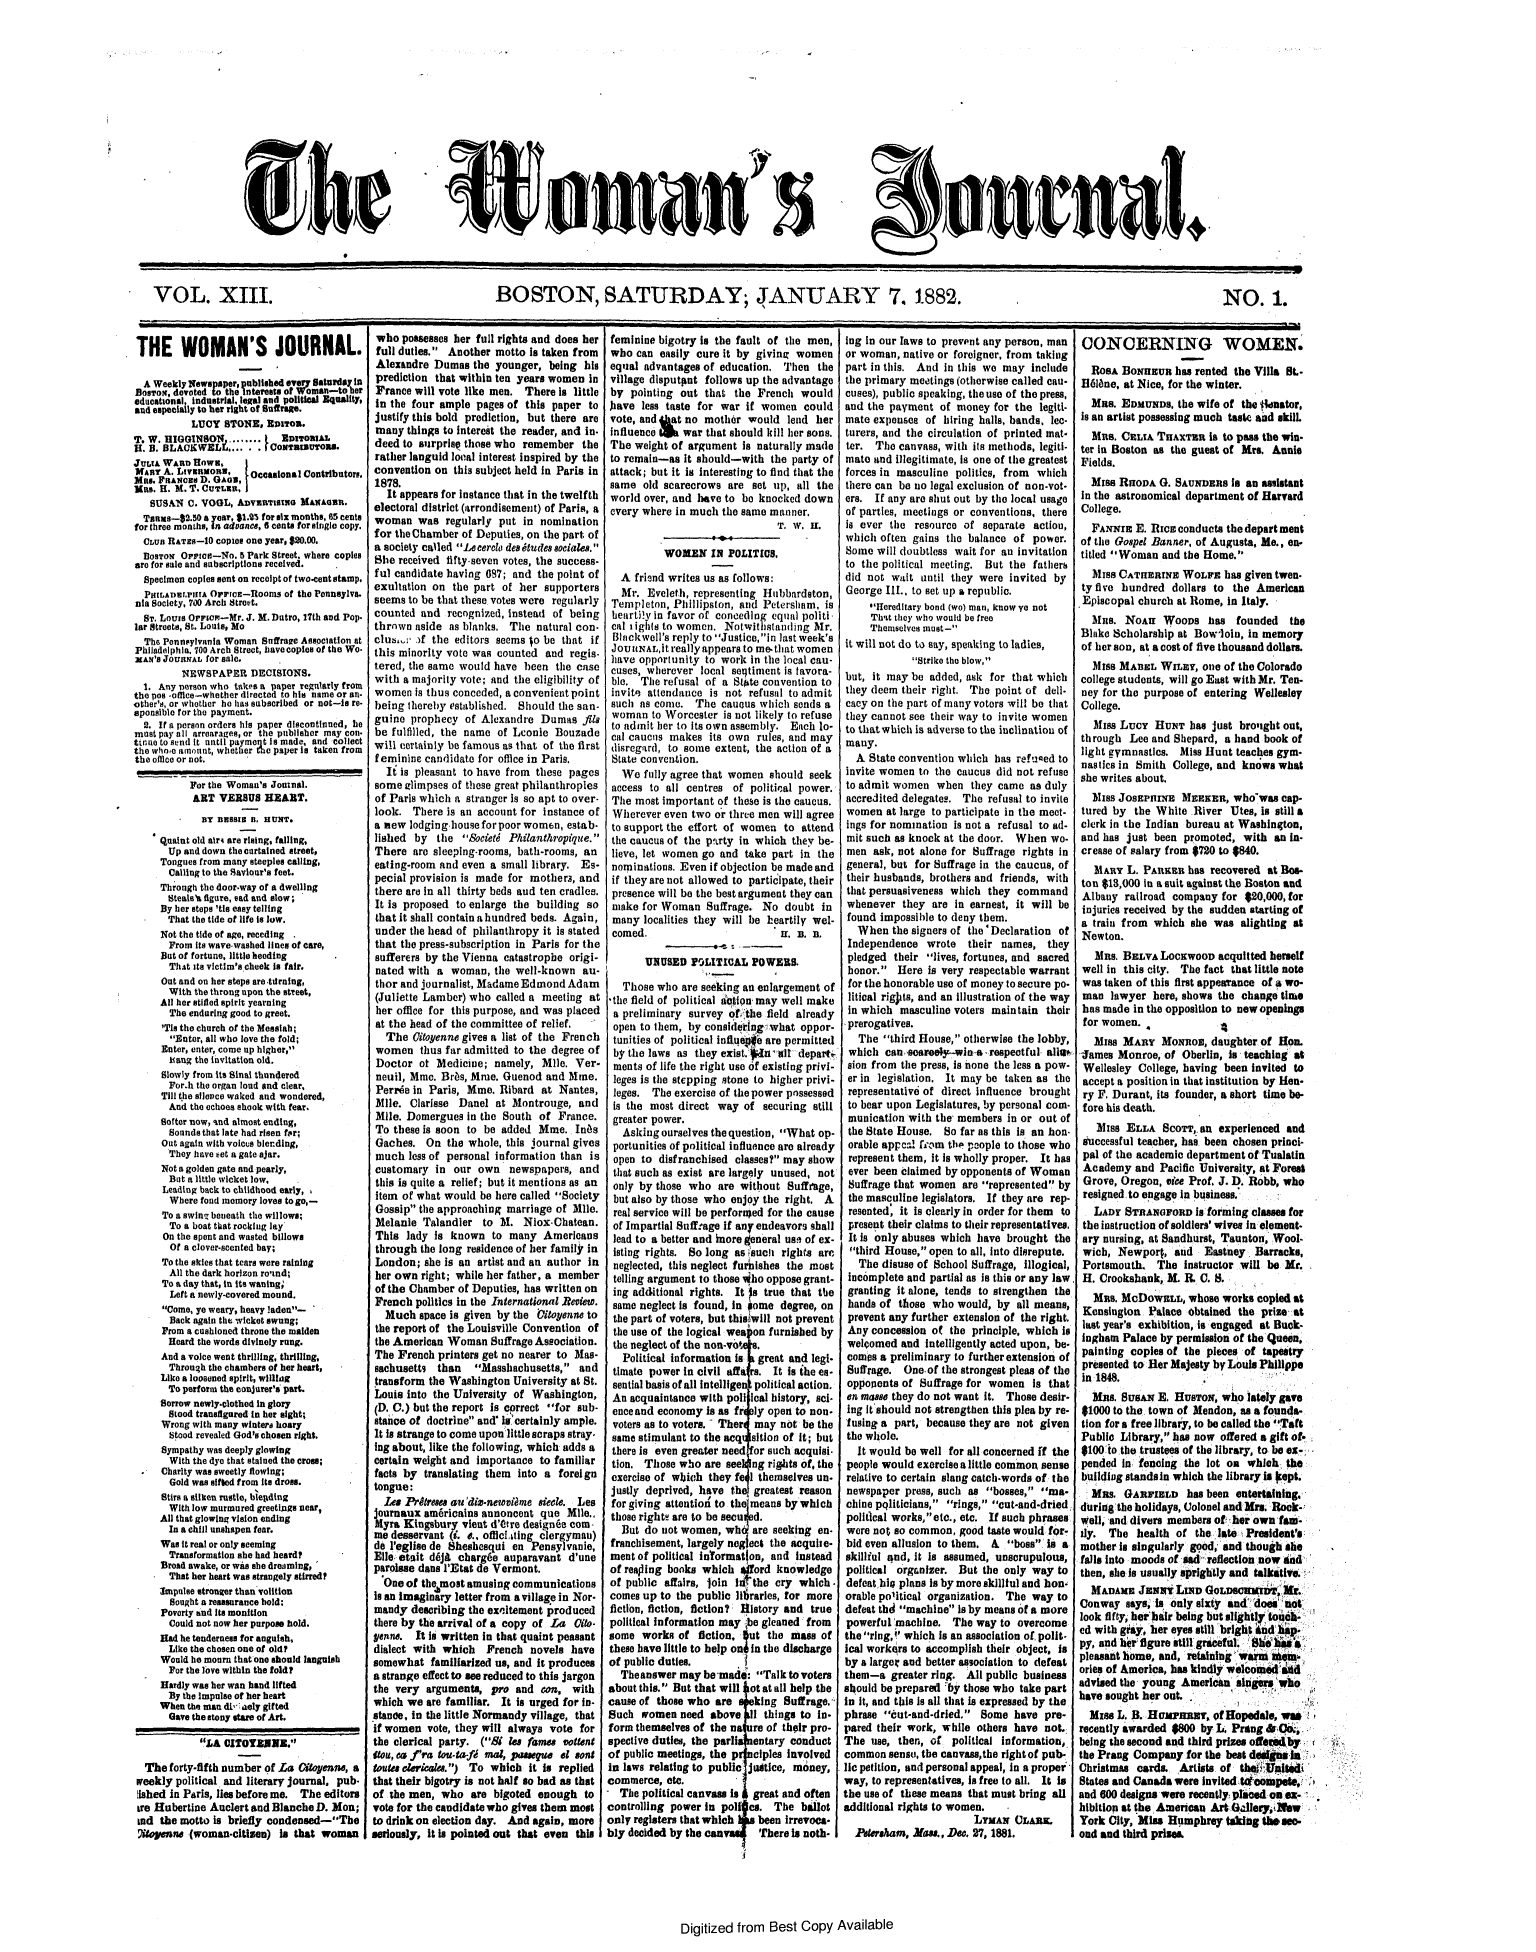 handle is hein.journals/wmjrnl13 and id is 1 raw text is: 















She


c e's


eusmaL


VOL. XIII.                                                      BOSTON, SATURDAY; JANUARY 7. 1882.                                                                                                      NO. 1.


THE WOMAN'S JOURNAL.

  A Weekly Newspaper, published ever Satarday ia
  BlosTog, devoted to the Interests of Woman-to her
educational, industrial, legal and political Equality,
and especially to her right of Snrage.
           LUCY  STONE,  Eaon.
T. W. HIGGINSON.........    ERTrOMas
R. B. BLACKWEIL....   .1orasuoas.
JurtA WARD Hows,
Maa   A. LvaRDoa,     OccasionalContributors.
MRS. FRAoo  D. GAO,
Mas. H.II. M. . CUTLER,
   SUSAN  0. VOGL,  Anvsnsux    MAona.
   Tass-2.50  a yeat, $1.95 for six months, 65 cents
for three months, in advance, 6 cents for single copy.
  CLUB RATES-1  copies one year, $20.00.
  BOTONr Orrn-No.   5 Park Street. where copes
are for sale and subscriptions received.
  Specimen copies sent on recolpt of two*centatamp
  PtILADETIIA  OPPE-11R ooms of the Penneylva.
  nia Society, 700 Arch Street.
  Sr. Louis Orrsor-Mr. J. X. Dutro, 17th and Pop.
lar Streets, St. Louts, No
  The Pennsylvania Woman Suffrage Association at
  Philadelphia. 100 Arch Street, havocoples of the We.
  XAN's JOURNAL for sale.
         NEWSPAPER DECISIONS.
  1. Any person who takes a paper regularly from
the pos -office-whether directed to his name or an-
otber's, or whether he ias subscribed or not-s re-
aponible for the payment.
  2. If a perenn orders his paper discontinned, be
must pay all arrearages, or the publisher may con.
tinue to send it until paymeq Is made, and collect
the whoe amount, whether me paper is taken from
the office or not.

           For the Woman's Jomnal.
           ART  VERSUS  HEART.
             BY BEBIS 18B. HUNT.
     Quaint old atr are rising, faling,
       Up and down the curtained street,
     Tongues from many steeples calling,
       Calling to the Savour's feet.
     Through the door-way of a dwelling
       Steals'h figure, sad and slow;
     By her steps 'tis easy telling
       That the tide of life is low.
     Not the tide of age, receding
       From its wave-washed lines of care,
     But of fortune, little heeding
       That its victim's cheek is fair.
     Out and on her steps are titming,
       With the throng upon the street,
     All her Stifled spirit yearning
       The enduring good to greet.
       'Ti. the church of the Messiah;
       Enter, all who love the fold;
     Enter, enter, come up higher,
       bang the invitation old.
     Slowly from its Sinai thundered
       For-h the organ load and clear,
     Till the silence waked and wondered,
       And the echoes shook with fear.
     Softer now, and almost ending,
       Soundsathat late had risen far;
       Out again with voices blending,
       They have set a gate ajar.
     Not a golden gate and pearly,
       But a little wicket low,
       Leading back to childhood early,
       Where food memory loves to go,-
       To a swing beneath the willows;
       To a boat that rocking lay
       On the spent and wasted billows
       Of a cloverscented bay;
       To the skies that tears were raining
       All the dark horizon ro'end;
       To a day that, in its waning;
       Left a newly-covered mound.
       Come, ye weary, heavy laden-
       Back again the wicket swung;
       Prom a cushioned throne the maiden
       Heard the words divinely rang.
     And a voice went thrilling, thrilling,
       Through the chambers of her heart,
     Like a loosened spirit, willing
       To perform the conjurer's part.
     Sorrow newlyclothed in glory
       Stood transfigured In her ight;
     Wrong with many winters hoary
       Stood revealed God's chosen right.
       Sympathy was deeply glowing
       With the dye that stained the crose;
     Charity was sweetly flowing;
       Gold was sifted from its dross.
     Stirs a silken rustle, bleding
       With low murmured greetings near,
     All that glowing vision ending
       In a chill unshapen fear.
     Was it real or only seeming
       Transformation she had heard?
     Broad awake, or was she dreaming,
     That  her heart was strangely stirred?
     Impulse stronger than volition
       Sought a reassurance hold;
     Poverty and its monition
       Could not now her purpose hold.
     Fad he tenderness for anguish,
       Like the chosen one of old?
     Would he mourn that one should languish
       For the love within the told?
     Hardly was her wan band lifted
       By the impulse of bar heart
     When the man d  aely gifted
       Gave the stony stare of Art.

             ILA CITOEZNE.

  The  forty-fifth number of La Gitoenne, a
  weekly political and literary journal, pub.
  lished In Paris, lies before me. The editors
  ire Hubertine Auclert and Blanche D. Mon;
  ad the motto Is briefly condensed-The
  litoene  (womancltisen)  Is that  woman


who   possesses her full rights and does her
full duties. Another  motto Is taken from
Alexandre   Dumas  the younger,  being his
prediction  that within ten years women in
France  will vote like men.  There Is little
in  the four ample  pages of this paper  to
justify this bold prediction, but there are
many   things to intercist the reader, and in-
deed  to surprisp those who remember   the
rather languid local interest inspired by the
convention  on this subject held In Paris in
1878.
   It appears for Instance that in the twelfth
electoral district (arrondisement) of Paris, a
woman was regularly put in nomination
for thebChamber  of Deputies, on the part of
a society called Leerce deadtudessociales.
She  received fifty-seven votes, the success-
ful candidate having 087; and  the point of
exultation on  the part  of her supporters
seems  to be that these votes were regularly
counted  and  recognized, instead of being
thrown  aside  as blanks. The  natural con-
clua A the editors seems o be that if
this minority vote was  counted  and regis-
tered, the same would  have  been  the case
with  a majority vote; and the eligibility of
women   is thus conceded, a convenient point
being  thereby established. Should the san-
guine  prophecy   of Alexandre  Dumas fil
be  fulfilled, the name of Lonie  Bouzade
will certainly be famous as that of the first
feminine  candidate for office in Paris.
   It is pleasant to have from these pages
 some elimpses of these great philanthropies
 of Paris which a stranger is so apt to over-
 look.  There is aii account for instance of
 a new lodging houseforpoor  women,  estab-
 lished by  the  oiet Philanthropique.
 There  are sleeping-rooms, bath-rooms, an
 eating-room and even a small library. Es-
 pecial provision is made for mother,  and
 there are in all thirty beds and ten cradles.
 It is proposed to enlarge the building so
 that it shall contain a hundred beds. Again,
 under the head of philanthropy it is stated
 that the press-subscription in Paris for the
 sufferers by the Vienna catastrophe origi-
 nated with a  woman,  the well-known   au-
 thor and journalist, Madame Edmond  Adam
 (Juliette Lamber) who called a meeting  at
 her office for this purpose, and was placed
 at the head of the committee of relief.
   The  Citoyenne gives a list of the French
 women   thus far admitted to the degree of
 Doctor  of Medicine;  namely,  Mle.  Ver-
 neuil, Mme. Bris, Mme.  Guenod  and Mme.
 Perrie in Paris, Mine. Ribard  at Nantes,
 Mile. Clarisse Danel  at Montrouge,   and
 Mile. Domergues  in the South of  France.
 To these is soon to be added  Mme.   Inds
 Gaches.  On  the whole, this journal gives
 much  less of personal information than is
 customary  in our  own   newspapers,  and
 this is quite a relief; but it mentions as an
 item of what would be here called Society
 Gossip the approaching marriage  of Mile.
 Melanie  Talander   to   . Niox-Chatean.
 This  lady is known   to many  Americans
 through the long residence of her family in
 London;  she is an artist and an author In
 her own right; while her father, a member
 of the Chamber of Deputies, has written on
 French politics in the International Revieo.
   Much  space is given by the Oitoenne to
 the report of the Louisville Convention of
 the American Woman   Suffrage Association.
 The French printers get no nearer to Mas-
 sachusetts than   Masshachusetts,   and
 transform the Washington  University at St.
 Louis into the University of Washington,
 (D. C.) but the report is correct for sub-
 stance of doctrine and' i.a certainly ample.
 It is strange to come uponlittle scraps stray-
 Ing about, like the following, which adds a
 certain weight and importance to familiar
 facts by translating them into a  foreign
 tongue:
 Les  Prtreea  a 'di-neoviame  sieele. Les
 journaux amricains  annoncent  quo  Mile..
 Myrs Kingsbury  vient d'Otre designee com*
 me desservant (i. *., officisting clergyman)
 de l'egise de Shehesqui  en  Pensylvanie,
 Eileeit   d6jA chargde auparavant   d'une
 parolise dans P'Etat d Vermont.
 One   of the most amusing communications
 Is an Imaginary letter from a village in Nor-
 mandy describing the exltement  produced
 there by the arrival of a copy of La Cito
 yene.  It Is written In that quaint peasant
 dialect with which   French  novels have
 somewhat  familiarized us, and It produces
 a strange effect to see reduced to this jargon
 the very arguments,  pro  and  con,  with
 which we are familiar. It is urged for in-
 stance, in the little Normandy village, that
 if women vote, they will always vote  for
 the clerical party. (Bi les fames sotent
 iou, ea fra touta-fi anal, pasegue el sent
 taouts etericala.) To which it is replied
 that their bigotry is not half so bad as that
 of the men, who   are bigoted enough   to
 vote for the candidate who gives them most
 to drink on election day. And again, more
seriously, it Is pointed out that even this


feminine  bigotry is the fault of the men,
who   can easily cure it by giving  women
equal  advantages of education.  Then   the
village disputput  follows up the advantage
by   pointing out that  the French  would
have   less taste for war it women   could
vote, and   at no mother   would lend  her
influence W   war  that should kill her sons.
The  weight of argument   is naturally made
to remain-as  It should-with   the party of
attack; but it is Interesting to find that the
same   old scarecrows  are set up,  all the
world  over, and have to be  knocked down
every  where in much  the same manner.
                                T. W. H.

           WOMEN IN POLITICS.

   A friend writes us as follows:
   Mr.  Eveleth, representing Iubbardton,
 Templeton,  Phillipston, and Petersam,  is
 heartilyin favor of conceding equal politi
 cal ights to women.  Notwithstanding Mr.
 Blkwell's  reply to Justice,in last week's
 JoUINA,,itrieally appearsato methat women
 have opportunity  to work in the local cau-
 cuses, wherever  local seqtiment is tavora-
 ble. The  refusal of a Stite convention to
 invite atendance  is not  refusal to admit
 such as come.   The  caucus which sends a
 woman   to Worcester is not likely to refuse
 to admit her to its own assembly. Each lo-
 cal cauces makes  its own  rules, and may
 disregard, to some extent, the action of a
 tate convention.
   We  fully agree that women  should seek
 access to all centres  of political power.
 The most  important of these is the caucus.
 Wherever  even two or three men will agree
 to support the effort of women  to  attend
 the caucus of the ptrty in which  they be-
 lieve, let women go and  take part in  the
 nominations. Even if objection be made and
 if they are not allowed to participate, their
 presence will be the best argument they can
 make  for Woman   Suffrage, No  doubt  in
 many  localities they will be heartily wel-
 comed.                        Jt.   . n.

       UNUSED   POLITICAL  POWERS.

   Those who  are seeking an enlargement of
'the field of political fition may well make
a  preliminary survey  ofithe field already
open  to them, by conideig what oppor-
tunities of political influp,4e are permitted
by  the laws as  they exist.fln dal depar-
ments   of life the right use of existing privi-
leges is the stepping stone to higher privi-
leges.   The exercise of the power possessed
Is  the most  direct way  of securing  still
greater power.
   Asking ourselves the question, What op-
 portunities of political influence are already
 open  to disfranchised classes? may show
 that such as exist are largely unused, not
 only by those who   are without  Suffrage,
 but also by those who enjoy the  right. A
 real service will be perfored for the cause
 of Impartial Sufftage If any endeavors shall
 lead to a better and more general use of ex-
 isting rights. So long as such  rights are
 neglected, this neglect furbishes the most
 telling argument to those ho oppose grant-
 ing additional rights. It s  true that the
 same neglect is found, in *ome  degree, on
 the part of voters, but thiswIll not prevent
 the use of the logical we' on furnished by
 the neglect of the non-vos.
   Political information is great and legi-
 timate power In civil affa r. It is the es-
 sential basis of all intellige  political action.
 An acquaitance  with  pollcal history, sat.
 once and economy is as frly  open to non.
 voters as to voters. - Ther may not be the
 same stimulant to the aeq sition of It; but
 there is even greater need or such acquisi-
 tion. Those who  are see  ng rights of, the
 exercise of which they fe I themselves un-
 justly deprived, have th   greatest reason
 for giving attention to the means by which
 those rights are to be secu d.
   But do not women,  wh   are seeking  en.
 franchisement, largely neglct the aquite-
 ment of political lnTormaton, and  instead
 of reaing  books which ford knowledge
 of public affairs, join lmAthe cry which -
 comes up to the public li1rares, for more
 fiction, fiction, fiction? History and true
 political information may :be gleaned from
 some  works  of fiction, ut  the mass  of
 these have little to help on in the discharge
 of public duties.      I
   The answer maybe -made:  Talk to voters
about this. But that will ot at all help the
cause of those who  are     king Suffrage.
Such   romen  need  above I1  things to In-
form themselves of the na   re of their pro-
spective duties, the parli  entary conduct
of public meetings, the p   oiples involved
in laws relating to public jutice, money,
commerce,  etc.
-  The political canvass is great and often
controlling power  in pol cs.  The   ballot
only registers that which   been  Irrevoca-
bly decided by the can    There   is noth-


ing in our laws to prevent any person, man
or woman,  native or foreigner, from taking
part in this. And  in this we may include
the primary  meetings (otherwise called cau-
cuses), public speaking, the use of the press,
and  the payment  of money  for the  legiti-
mate  expenses of  hiring halls, bands, lec-
turers, and the circulation of printed mat-
ter.  The canvass, with its methods, legiti-
mate  and illegitimate, is one of the greatest
forces in masculine  politics, from which
there can be no legal exclusion of non-vot-
er.   If any are shut out by the local usage
of parties, meetings or conventions, there
is ever  the resource  of separate  action,
which  often gains the balance  of  power.
Some  will doubtless wait for an invitation
to the political meeting.  But the  fathers
did  not wait until they  were invited  by
George  III.. to set up a republic.
     Hereditary bond (wo) manm, know ye not
     That they who would be free
     Themselves must-
it will not do to cay, speaking to ladies,
             Strike the blow,
but,  it may be added, ask for  that which
they deem  their right. The point of  dell-
cacy on the part of many voters will be that
they cannot see their way to invite women
to that which is adverse to the inclinatio of
many.
  A  State convention which has refuned to
invite women  to the caucus  did not refuse
to admit women when they came as duly
accredited delegates. The  refusal to invite
women   at large to participate in the meet-
ings for nomination  is not a refusal to ad-
mit such  as knock at the door. When   wo-
men   ask, not alone for Suffrage rights in
general, but for Suffrage in the caucus, of
their husbands, brothers and friends, with
that persuasiveness which  they  command
whenever   they  are In earnest, it will be
found  impossible to deny them.
   When  the signers of the'Declaration of
 Independence   wrote  their  names,  they
 pledged their  lives, fortunes, and sacred
 bonor.  Here  is very respectable warrant
 for the honorable use of money to secure po-
 litical rigts, and an illustration of the way
 in which  masculine voters maintain  their
 prerogatives.
   The  third House, otherwise the lobby,
 which  can .soareel-wina- respectful allow,
 sion from the press, is hone the less a pow-
 er in legislation. It may be taken as  the
 representative of direct influence brought
 to bear upon Legislatures, by personal com-
 munication with the members   in or out of
 the State House.  So far as this Is an hon-
 orable appeal fUom the people to those who
 represent them, it is wholly proper. It has
 ever been claimed by opponents of Woman
 Suffrage that women  are represented by
 the masculine legislators. If they are rep-
 resented, it is clearly in order for them to
 present their claims to their representatives.
 It is only abuses which have  brought  the
 third House, open to all, into disrepute.
   The disuse of School Suffrage, illogical,
 incomplete and partial as is this or any law.
 granting it alone, tends to strengthen the
 hands of those  who would,  by  all means,
 prevent any further extension of the right.
 Any concession  of the principle, which is
 welcomed  and intelligently acted upon, be-
 comes a preliminary to further extension of
 Suffrage. One.of  the strongest pleas of the
 opponents of Suffrage for women  Is  that
 en masse they do not want It. Those desir-
 ing it should not strengthen this plea by re-
 'fusing a part, because they are not given
 the whole.
   It would be well for all concerned If the
 people would exerciseea4little common sense
 relative to certain slang catch-words of the
 newspaper  press, such as bosses, ma-
 chine pqliticians, rings, cut-and-dried
 political works,etc., etc. If such phrases
 were not so common,  good taste would for
 bid even allusion to them. A  boss Is a
 skillful tnd, It is assumed, unscrupulous,
 political organizer. But the only way  to
 defeat,hig plans is by more skillful and hon-
 orable poitical organization. The way  to
 defeat thd machine Is by means of a more
 powerful machine.  The  way to  overcome
 the ring, which is an association of. polit-
 ical workers to accomplish their object, Is
 by a larges and better association to defeat
 them-a  greater ring. All public business
 should be prepared by those who take part
 In it, and this is all that is expressed by the
 phrase cut-and-dried   Some  have  pre-
 pared their work, while others have  not.
 The use, then, of  political Information
 common  sense, the canvass,the right of pub-
 lic petition, and personal appeal, In a proper
 way, to representatives, is free to all. It is
the use of these means that must bring all
additional rights to women.
                        LYxAx   OLAns.
  Peerasham, Mass., Dee. 27, 1881.


OONCERNING WOMEN.

  RosA  BoNIXsua  has rented the Villa St.-
B616ne, at Nice, for the winter.
  Ms,   EDMUNDs.   the wife of the ldnator,
is an artist possessing much taste and skilL
  Me.   CELIA  THAXTER  Ia to pass the win
ter in Boston as the guest of  Mrs. Annie
Fields.
  Miss  RHODA  G. SAUNDERS  isoan assistant
in the astronomical department  of Harvard
College.
  FANNIE   E. RIoCconducts  theodepartment
of the Gospel Bannero Of Augusta, Me., en-
titled Woman   and the Home.
  MsS  CATHERINE   WOLF    has given twen-
  ty flive hundred dollars to the American
Episcopal  church at Rome, in  Italy.
   Mus.  NoAH   WOOD    has   founded   the
Blake  Scholarship at Bowlol,   in memory
of her son, at a cost of five thousand dollars.
   MIsS MABEL  WILY,   one of the Colorado
college students, will go East with Mr. Ten-
ney  for the purpose of entering Wellesley
College.
   Miss Lucy  HuNT   has just brought out,
through  Lee  and Shepard, a hand  book of
light gymnastics.  Miss Hunt teaches gym.
nastics in Smith  College, and knows what
she writes about.
  Miss JosEPRNEX   MEEKER,  who'was   cap-
  tured by the White  River Utes, is still a
clerk in the Indian bureau at Washington,
and  has just been  promoted,  with  an in-
crease of salary from $720 to $840.
   MARY  L. PARKER   has recovered at Bos-
 ton $18,000 in a suit against the Boston and
 Albany  railroad company  for $20,000, for
 injuries received by the sudden starting of
 a train from which  she was  alighting at
 Newton.
   M1s. BELVA  LoCKwooD   acquitted herself
 well in this city. The fact that little note
 was taken of this first appearance of a wo-
 man  lawyer  here, shows the  change time
 has made in the opposition to new openings
 for women.              A
   Miss MAny   Mono, daughter of Hon.
i'ames Monroe,  of Oberlin, is teaching at
Wellesley  College, having been invited to
accept a position in that institution by Hen-
ry  F. Durant, its founder, a short time be-
fore his death.
   MisS  ELLA   Scor,  an experienced  and
 successful teacher, has been chosen princi-
 pal of the academic department of Tualatin
 Academy   and Pacific University, at Forest
 Grove, Oregon, @eee Prof. J. D. Robb, who
 resigned to engage In business.
   LADY  STRANOFORD 8isforming c1808   for
 the instruction of soldiers' wives in element-
 ary nursing, at Sandhurst, Taunton, Wool
 wich, Newport,   and   Eastney  Barracks,
 Portsmouth.   The  Instructor will be Mr.
 H. Crookshank,  M. R. C. S.
   Mas. McDowaL, whose works copied at
 Kensington  Palace obtained  the prie  at
 last year's exhibition, is engaged at Buck-
 ingham Palace by permission of the Queen,
 painting copies of the pieces of  tapetty
 presented to Her Majesty by Louis Philippe
 in 1848.
 Mase.  Bus E. HUSTON,who lately gave
 $1000 to the town of Mendon, as a founds-
 tion for a free library, to be called the Taft
 Public Library, has now offered a gift of
 $100 o the trustees of the library, to be ex-,
 pended in fencing  the lot on  whih   the
 building standin which the libraryl (sept.
 Mas. GARFIELD has been entertaining,
 during'the holidays, Colonel and Mrs. Rock-
 well 'and divers members of her own  fa-
 ily. The  health of  the late President's
 mother is singularly good, and though she
 falls into moods of sad reflection now id
 then, she is usually sprightly and talkative.
 MADAX Jauwt LID GoLDCRMne 1 , M.
 Conway  says, 'is only sixty' and doe not
 look fifty, her hair being but slightly toucb-
 ed with gray, 'her eyes stilt bright sid ap
 py, and her figure tillI gIcefI. 1i
 pleasalthome, and, retainingbiwar1   m4,
 ories of America, has kindly welcoked I1
 advised the young Americn siagers  who
 have sought her out. .
 Miss  L. B. HUMPrREt, f opedale, wA
 recently awarded $800 by L, Prang do
 being the second and third priles offedby
 the Prang Company  for the best du    In
 Christmas cards.  Artiste of th J' th
 States and Canada were Invited t-ompete,
and 600 designs were recently plced on ex-  
hibition at the American Art G(al'leypltw
York  City, Miss Humphrey   taiing theso-
ond and third prizes


Digitized  from  Best  Copy  Available


